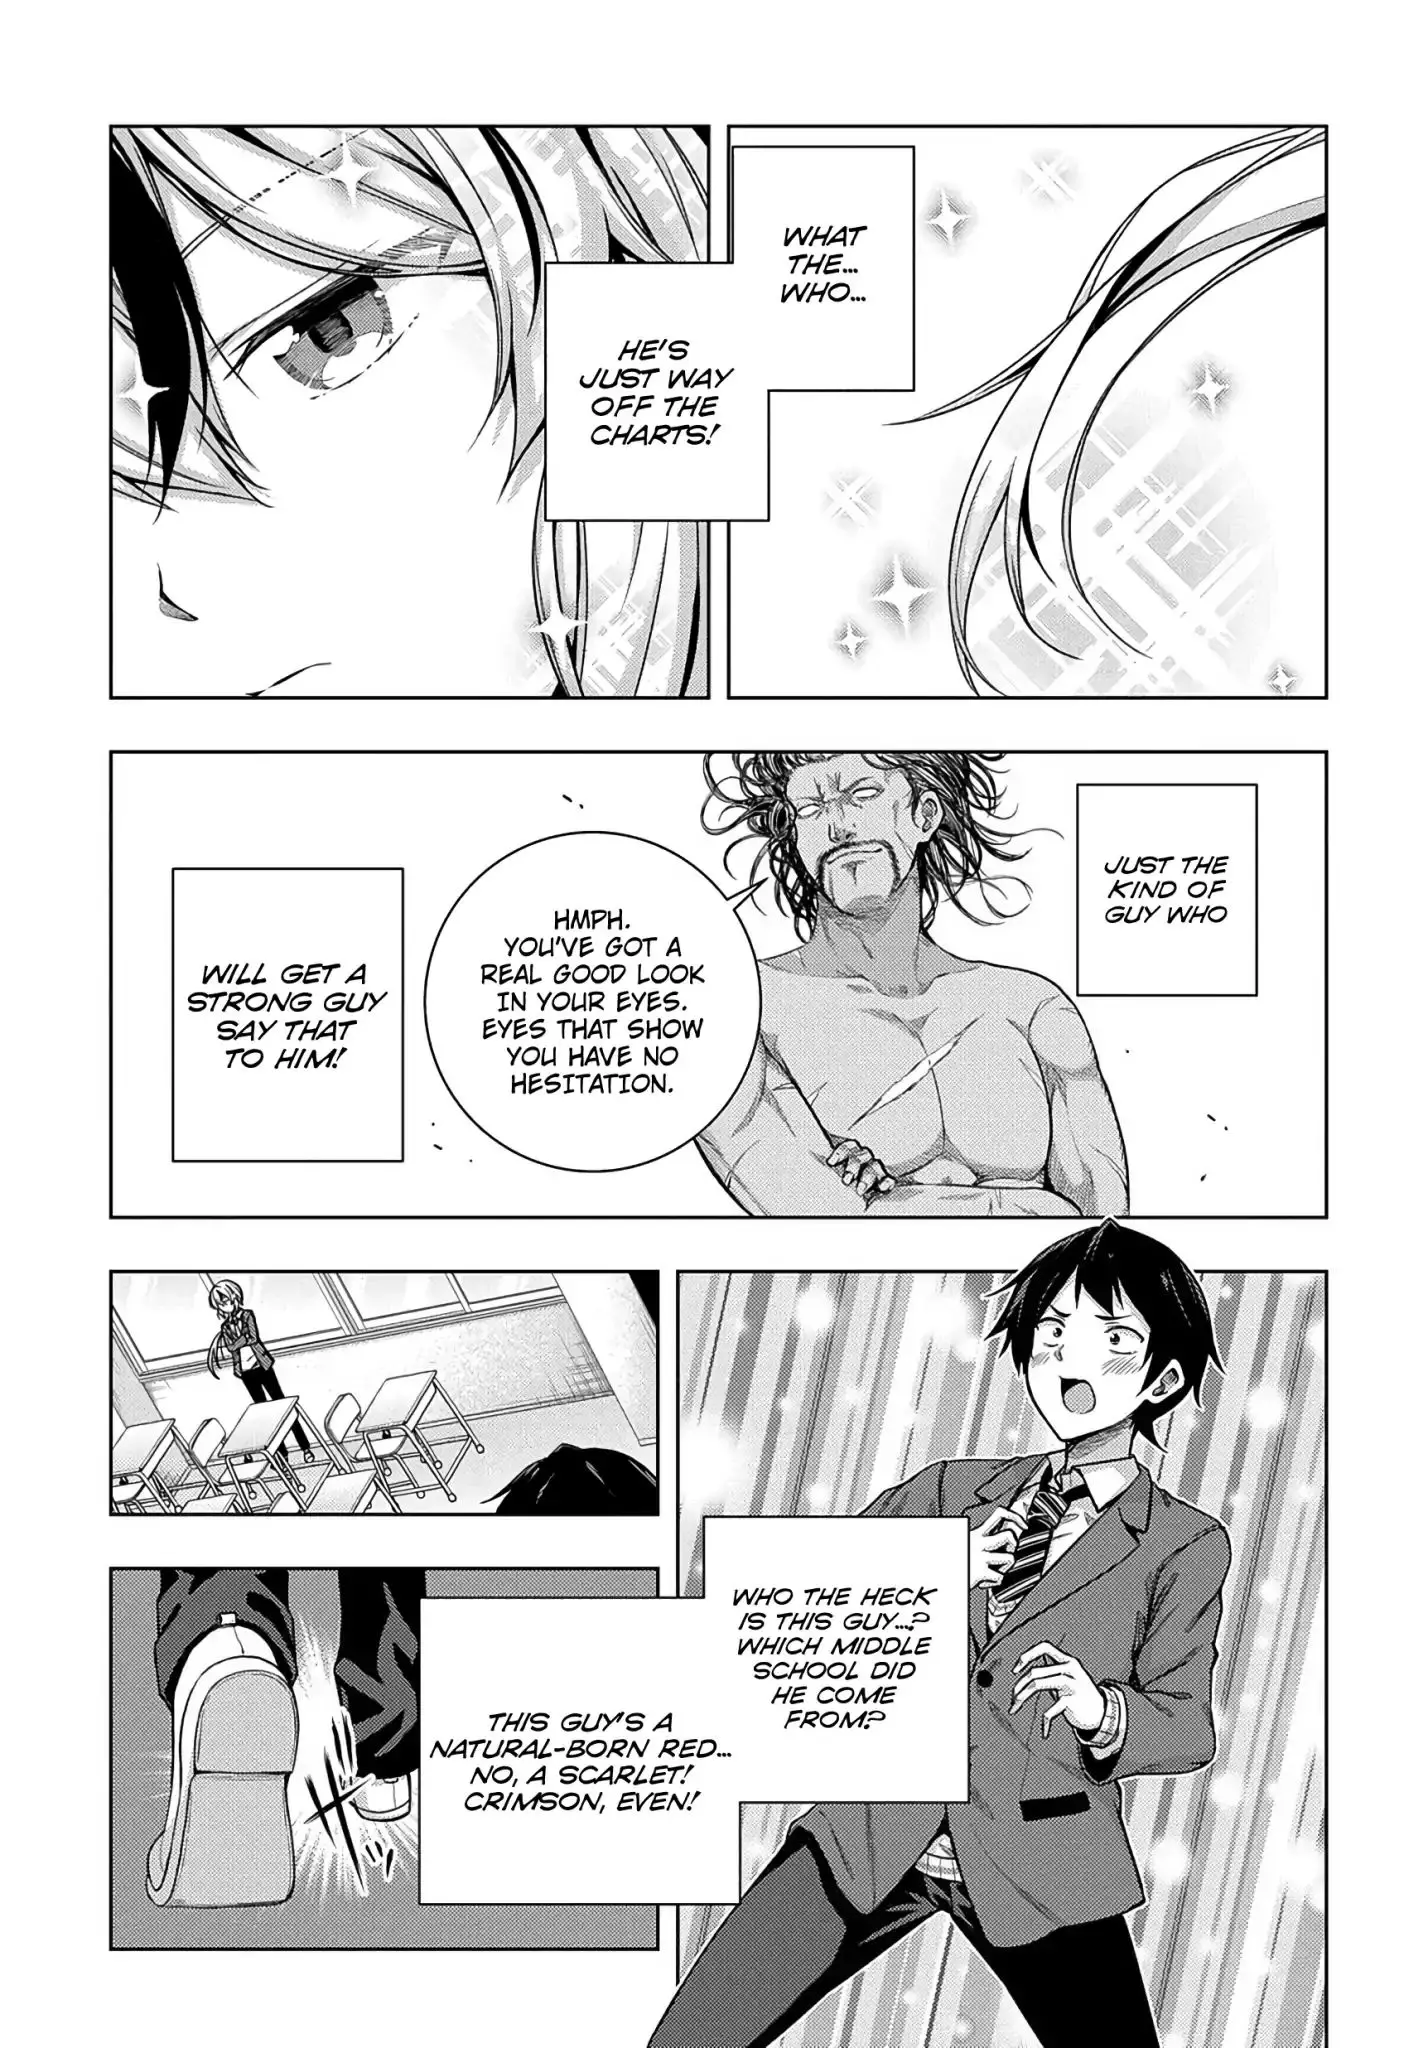 Is It Tough Being A Friend? - 1 page 25